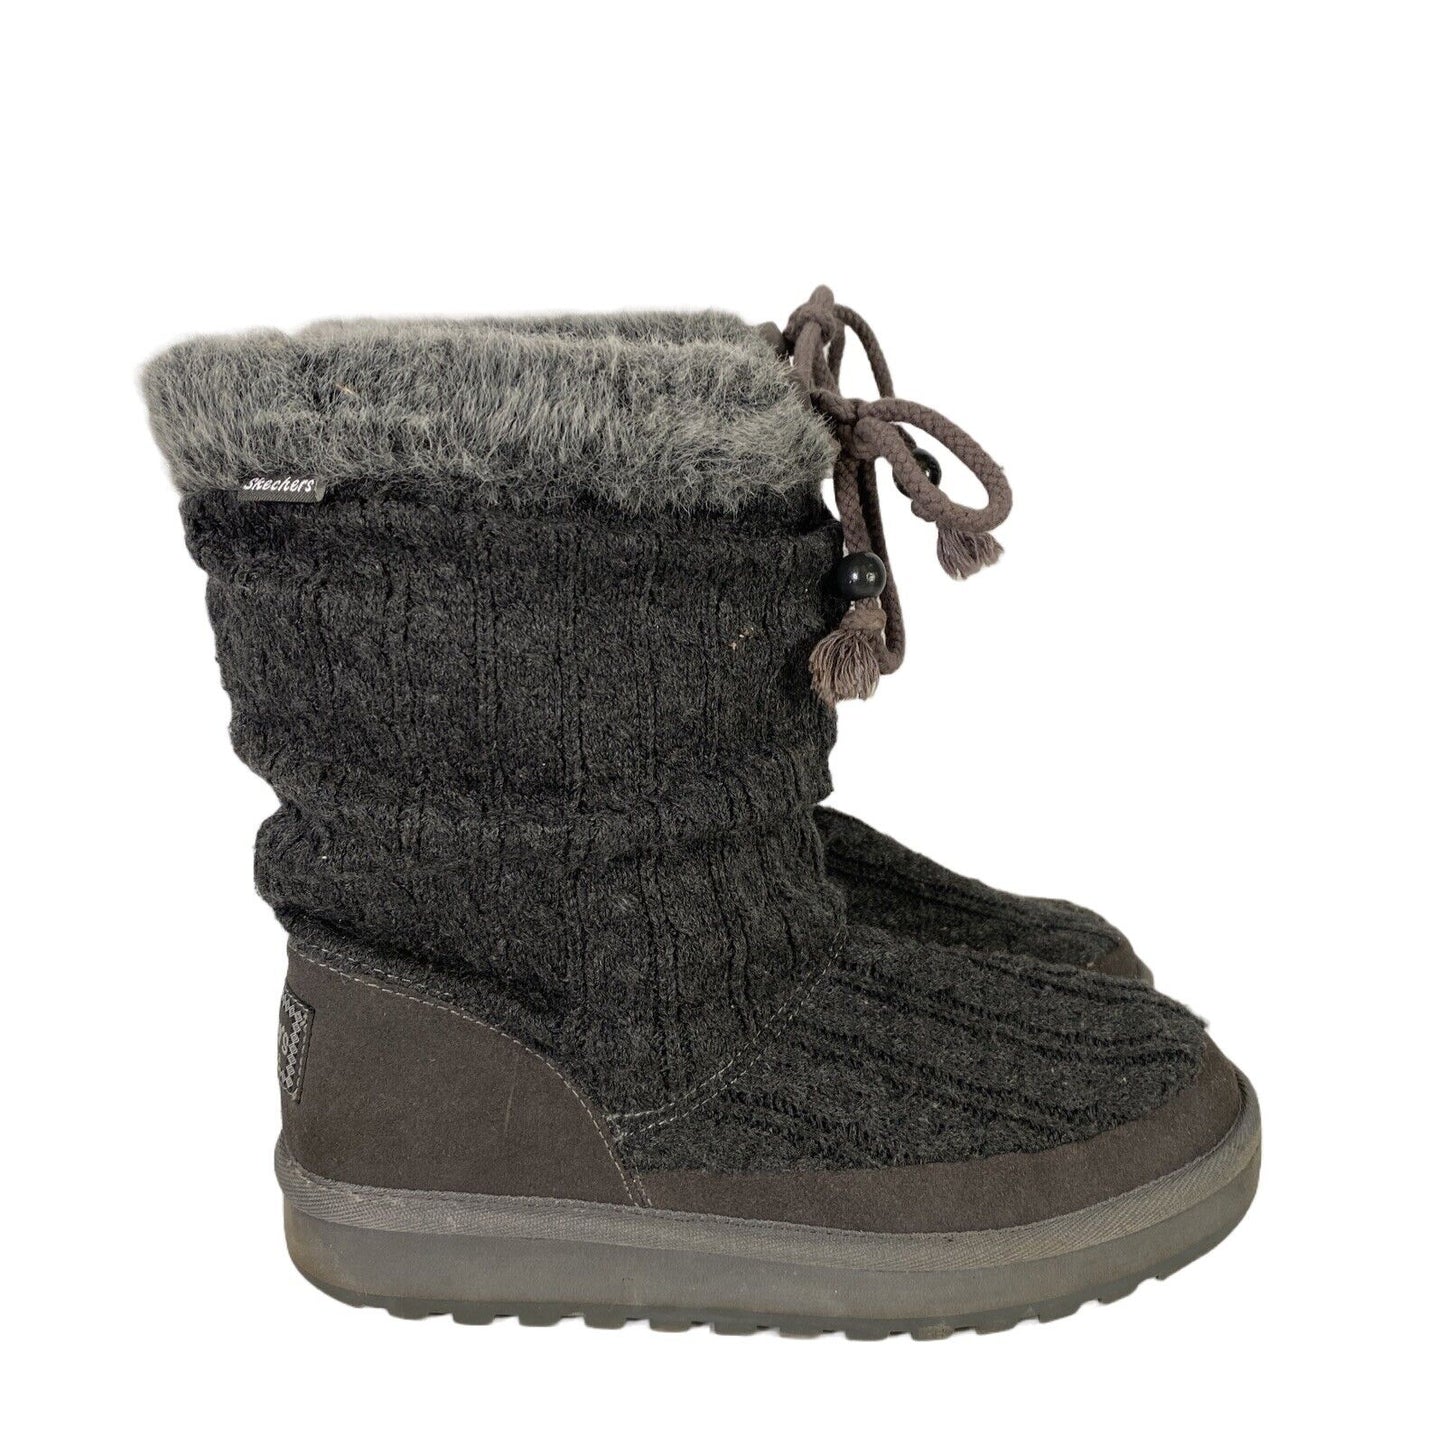 Skechers Women's Gray Mid Calf Cable Knit Keepsakes Sweater Boots - 9.5